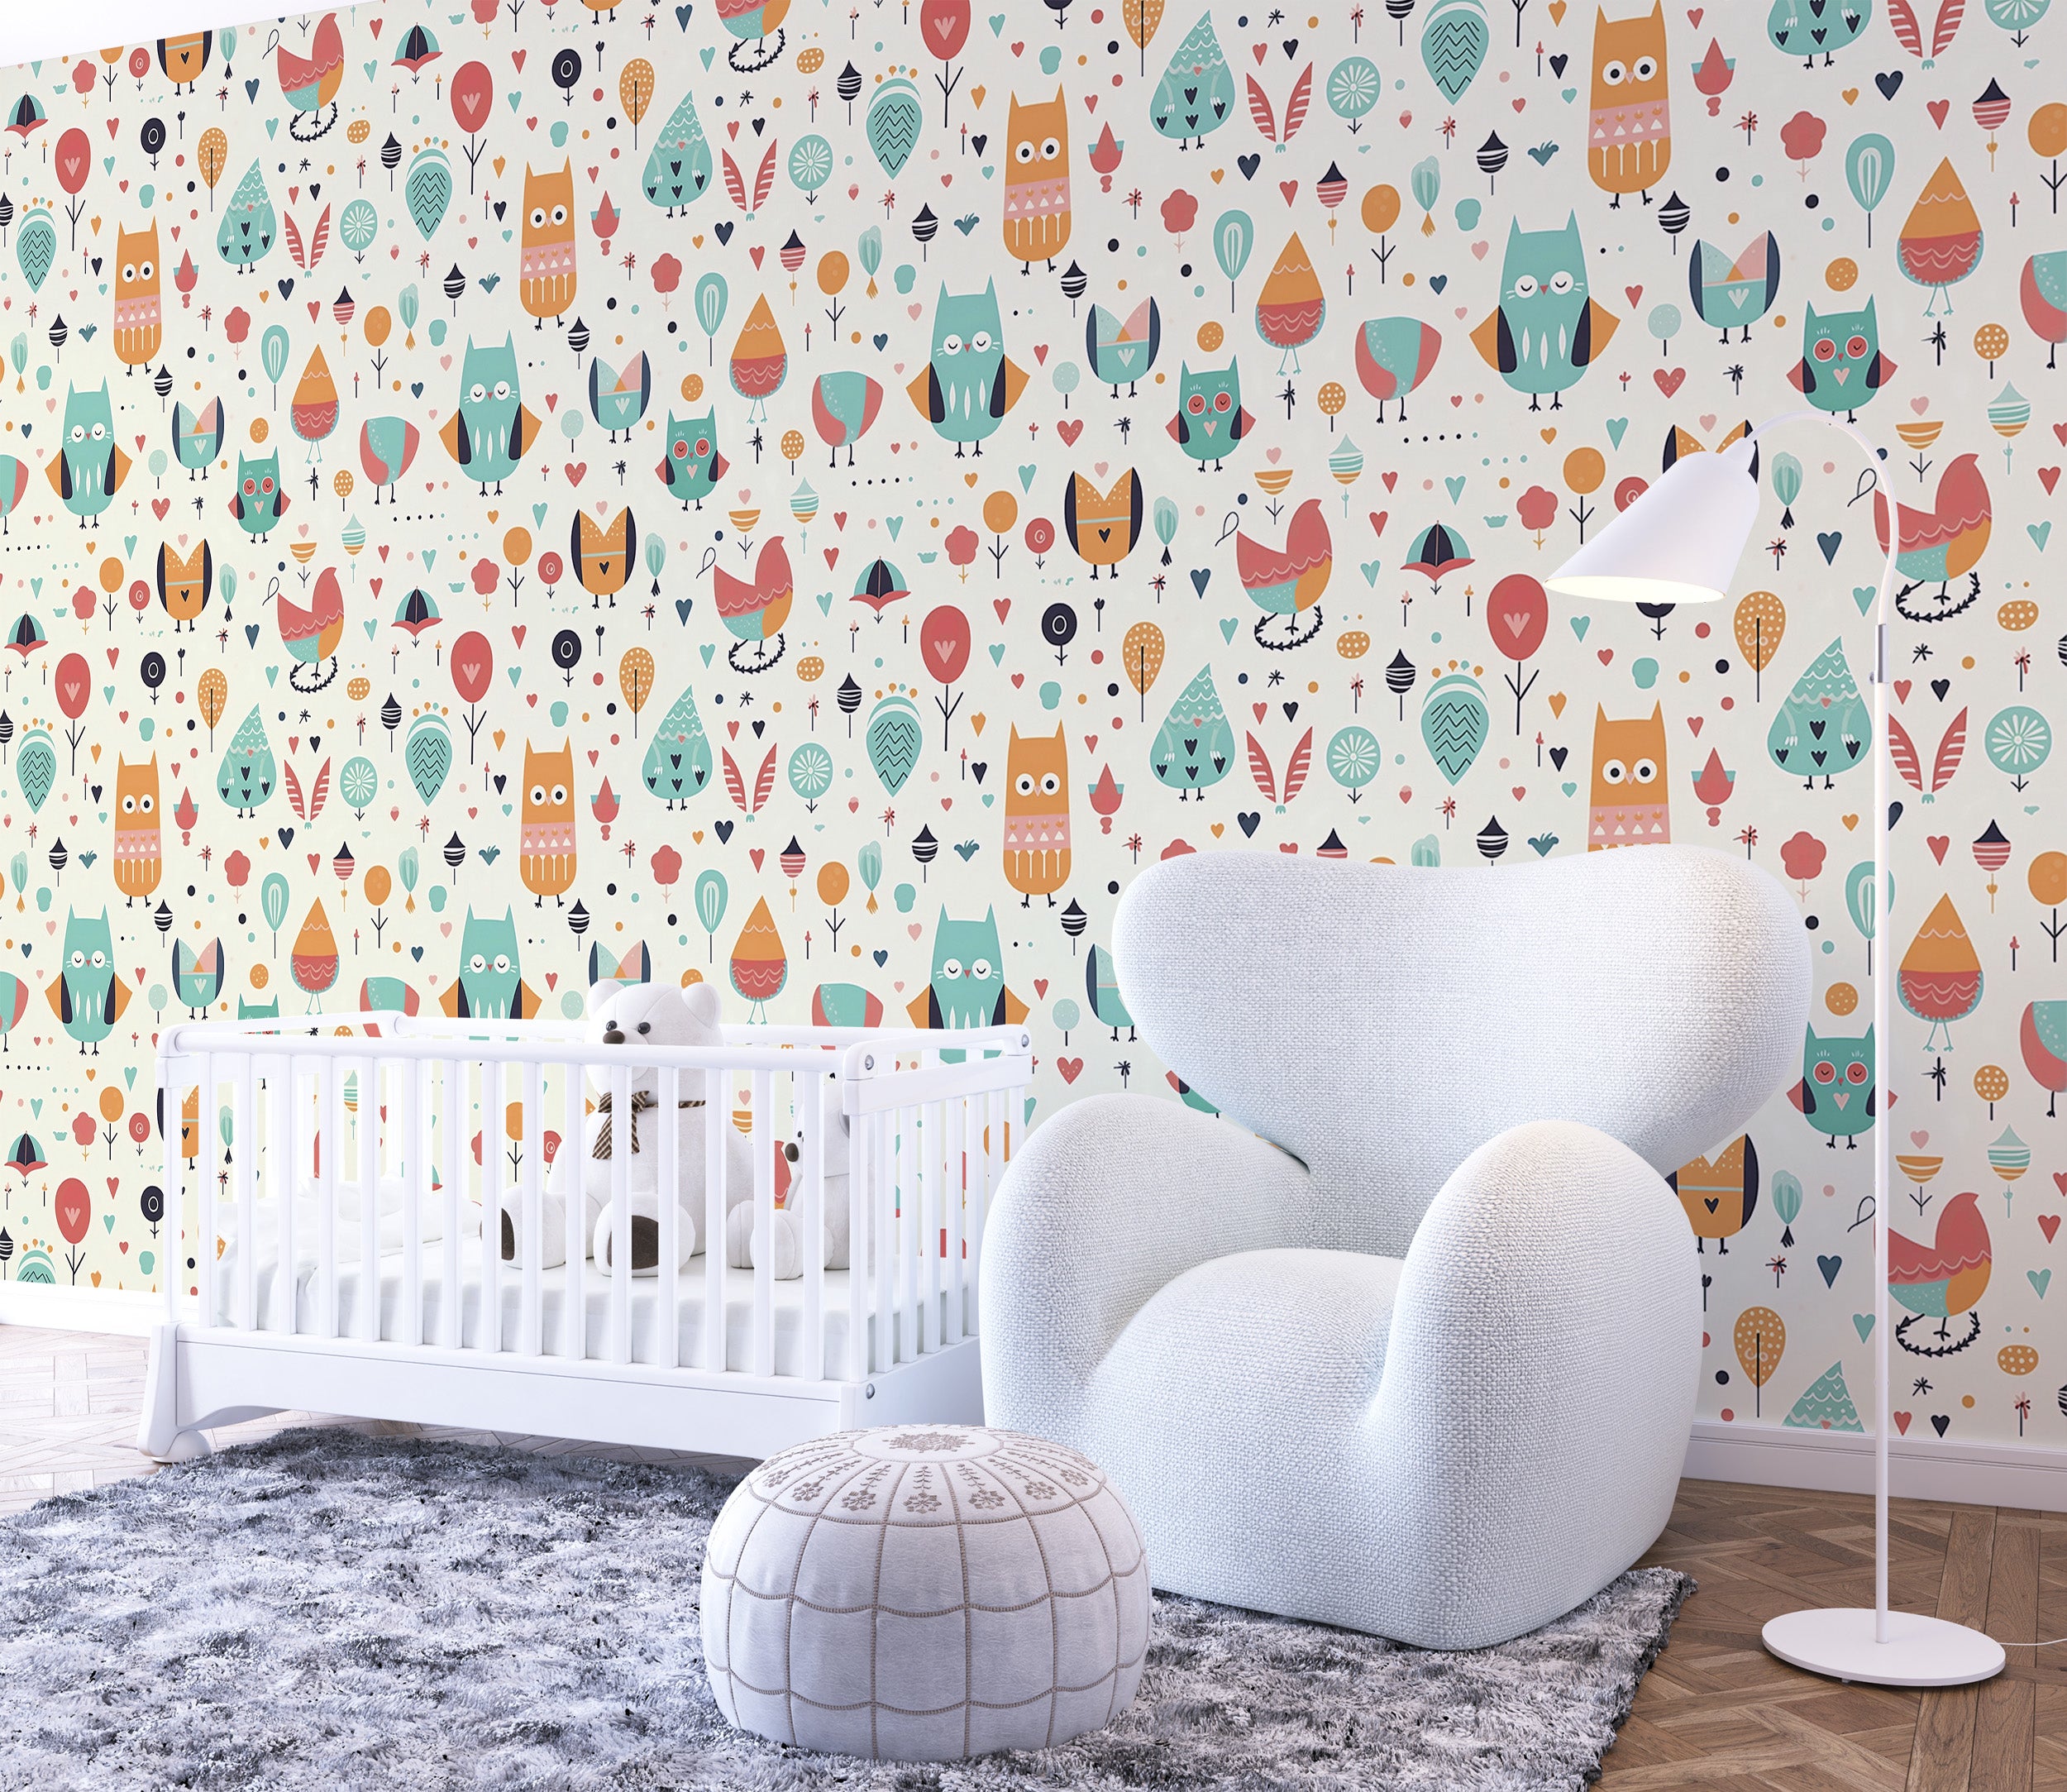 Seamless Blending of Style and Whimsy with Removable Owl Decal